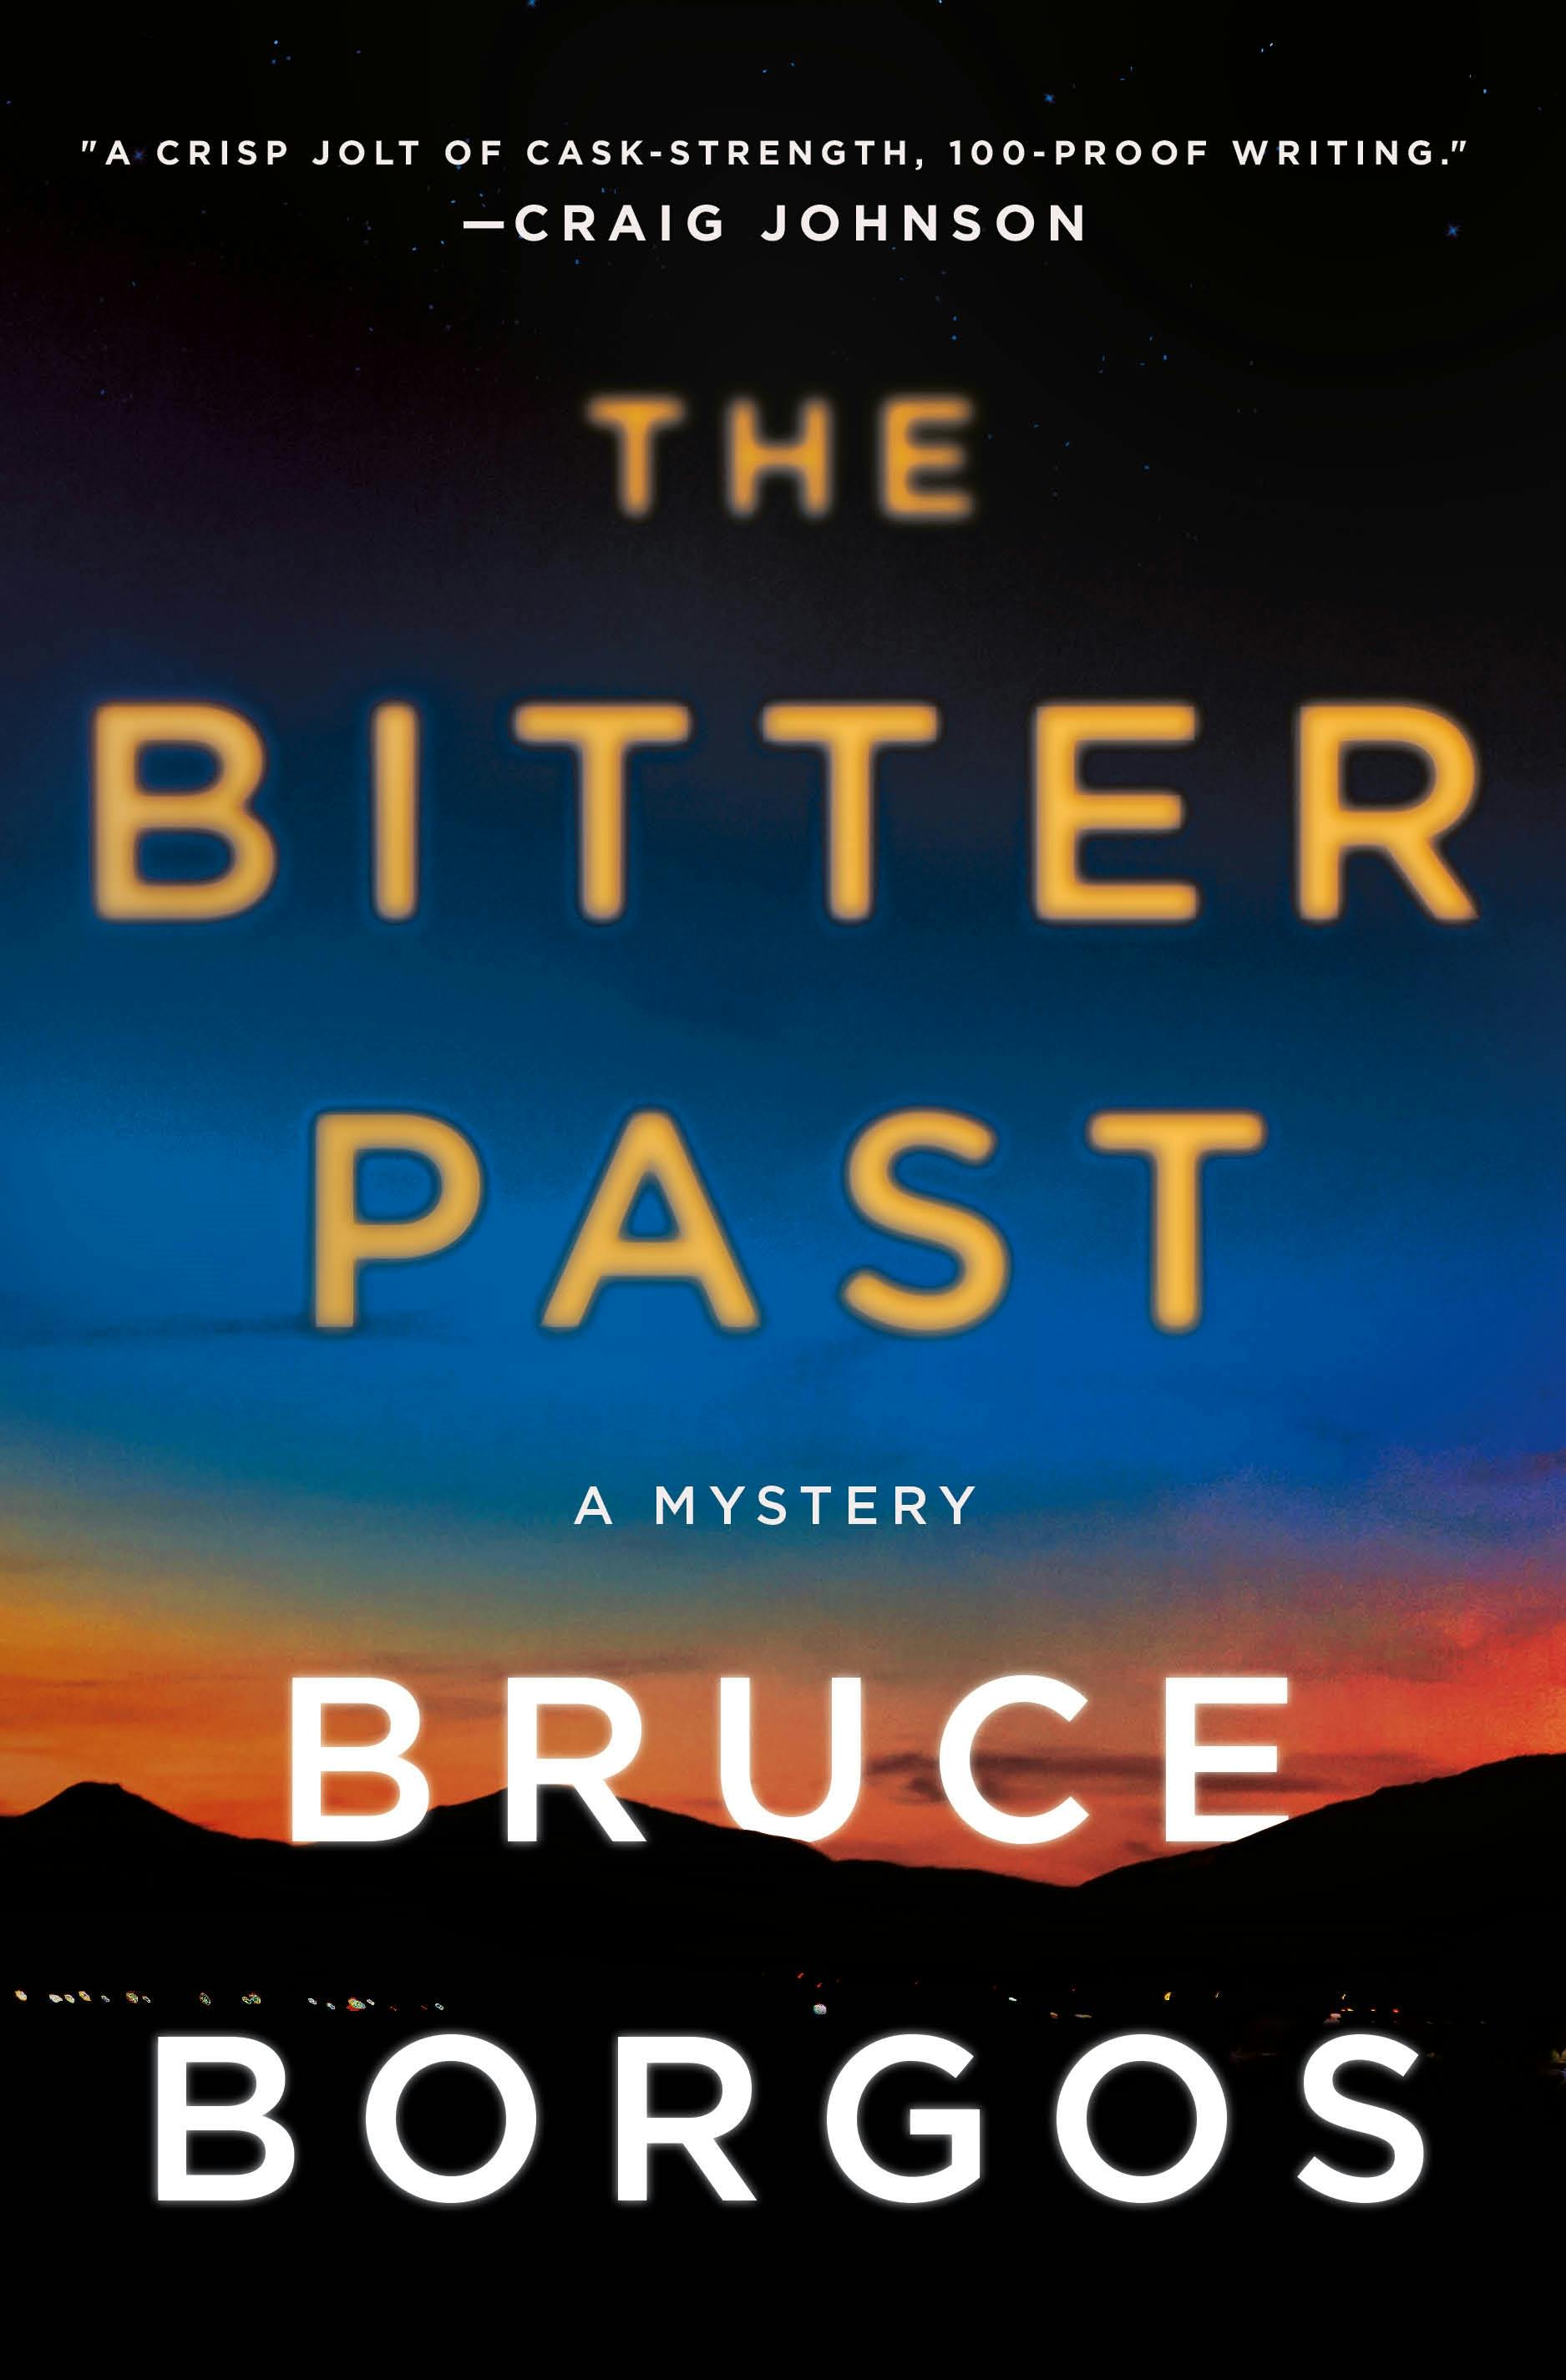 The Bitter Past by Bruce Borgos